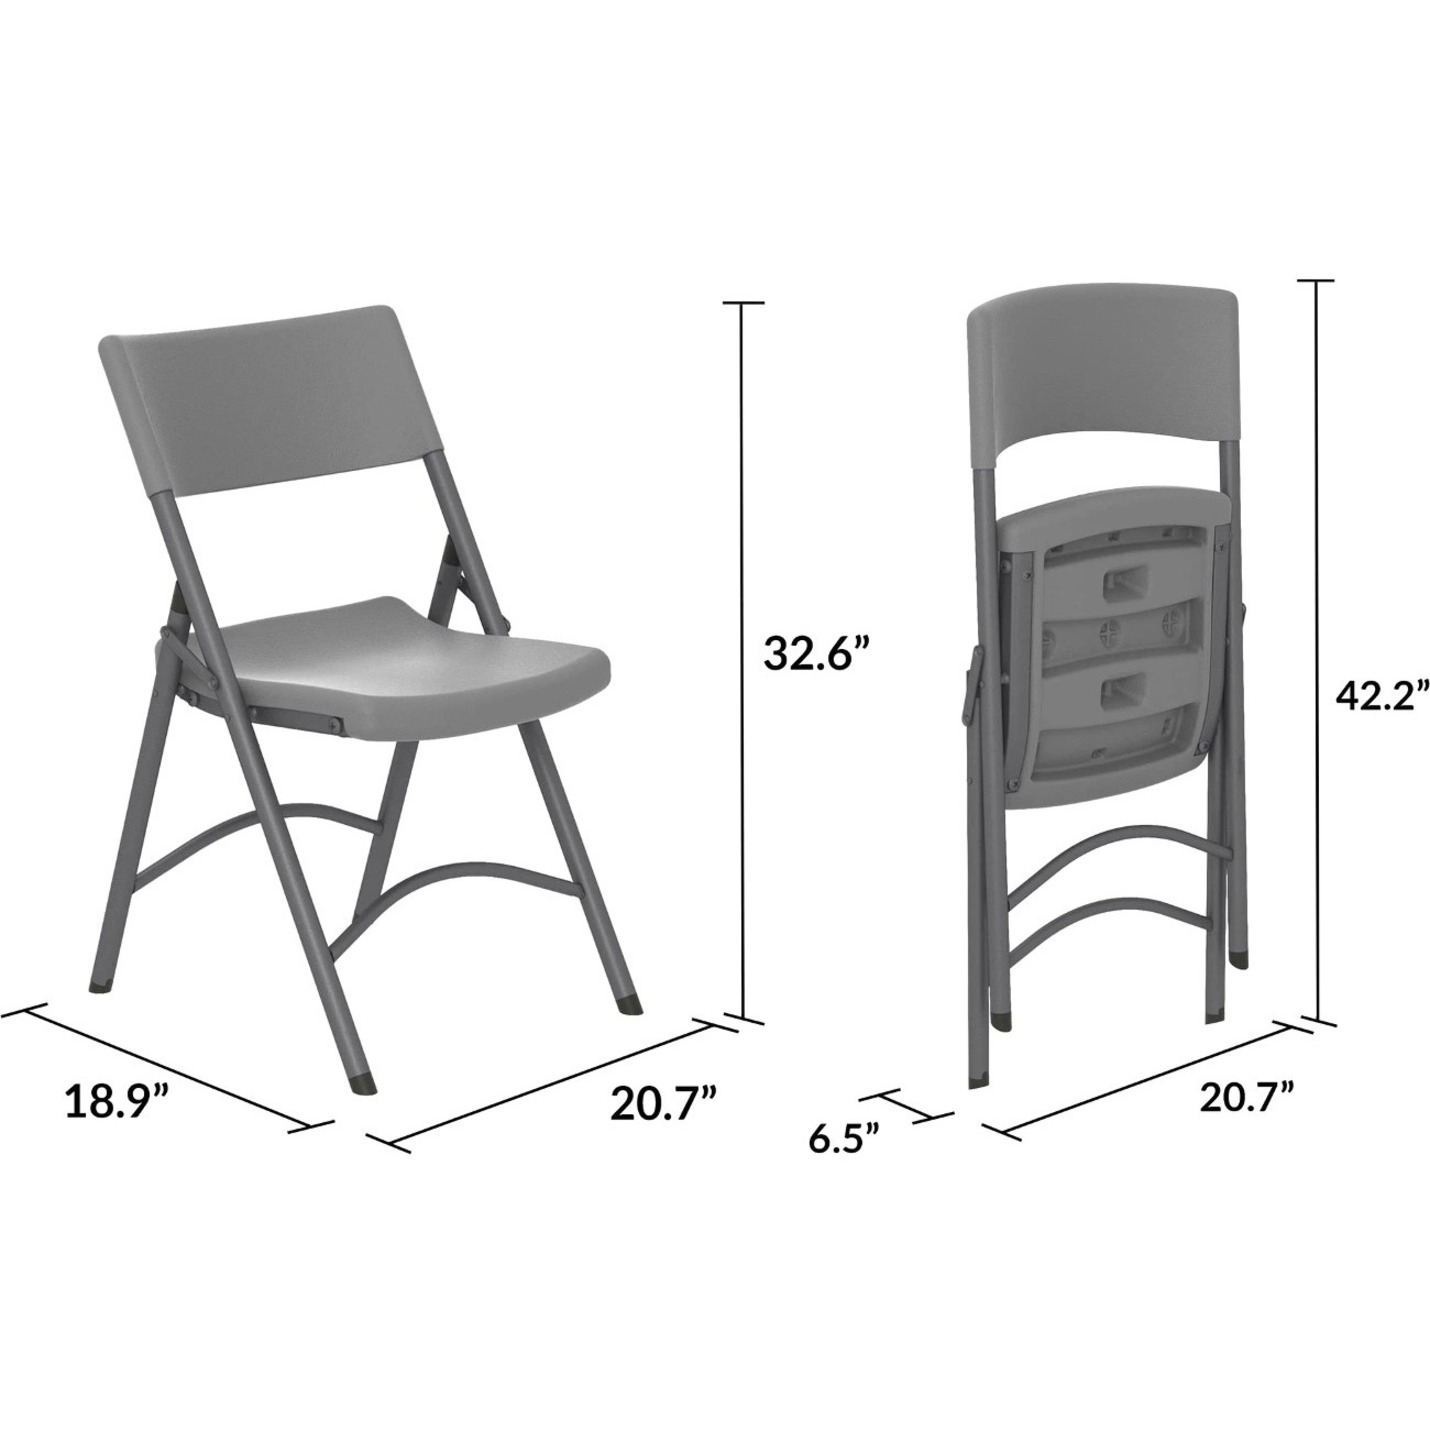 Dorel Industries CSC60410SGY4E Folding Chair, Gray - Pack of 4 - image 4 of 7